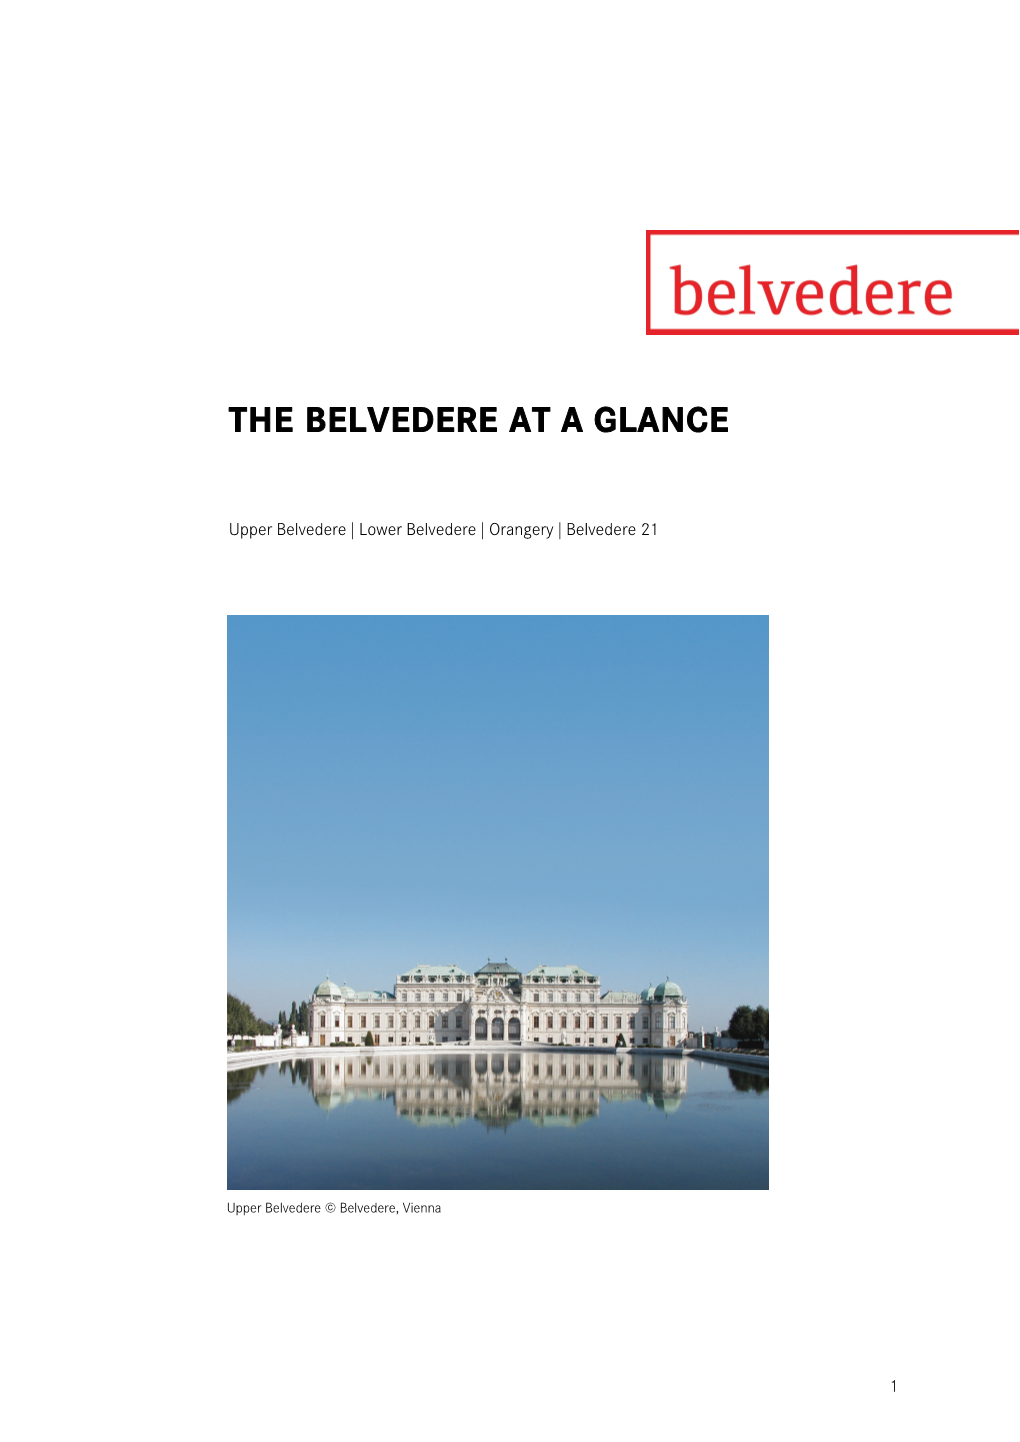 The Belvedere at a Glance